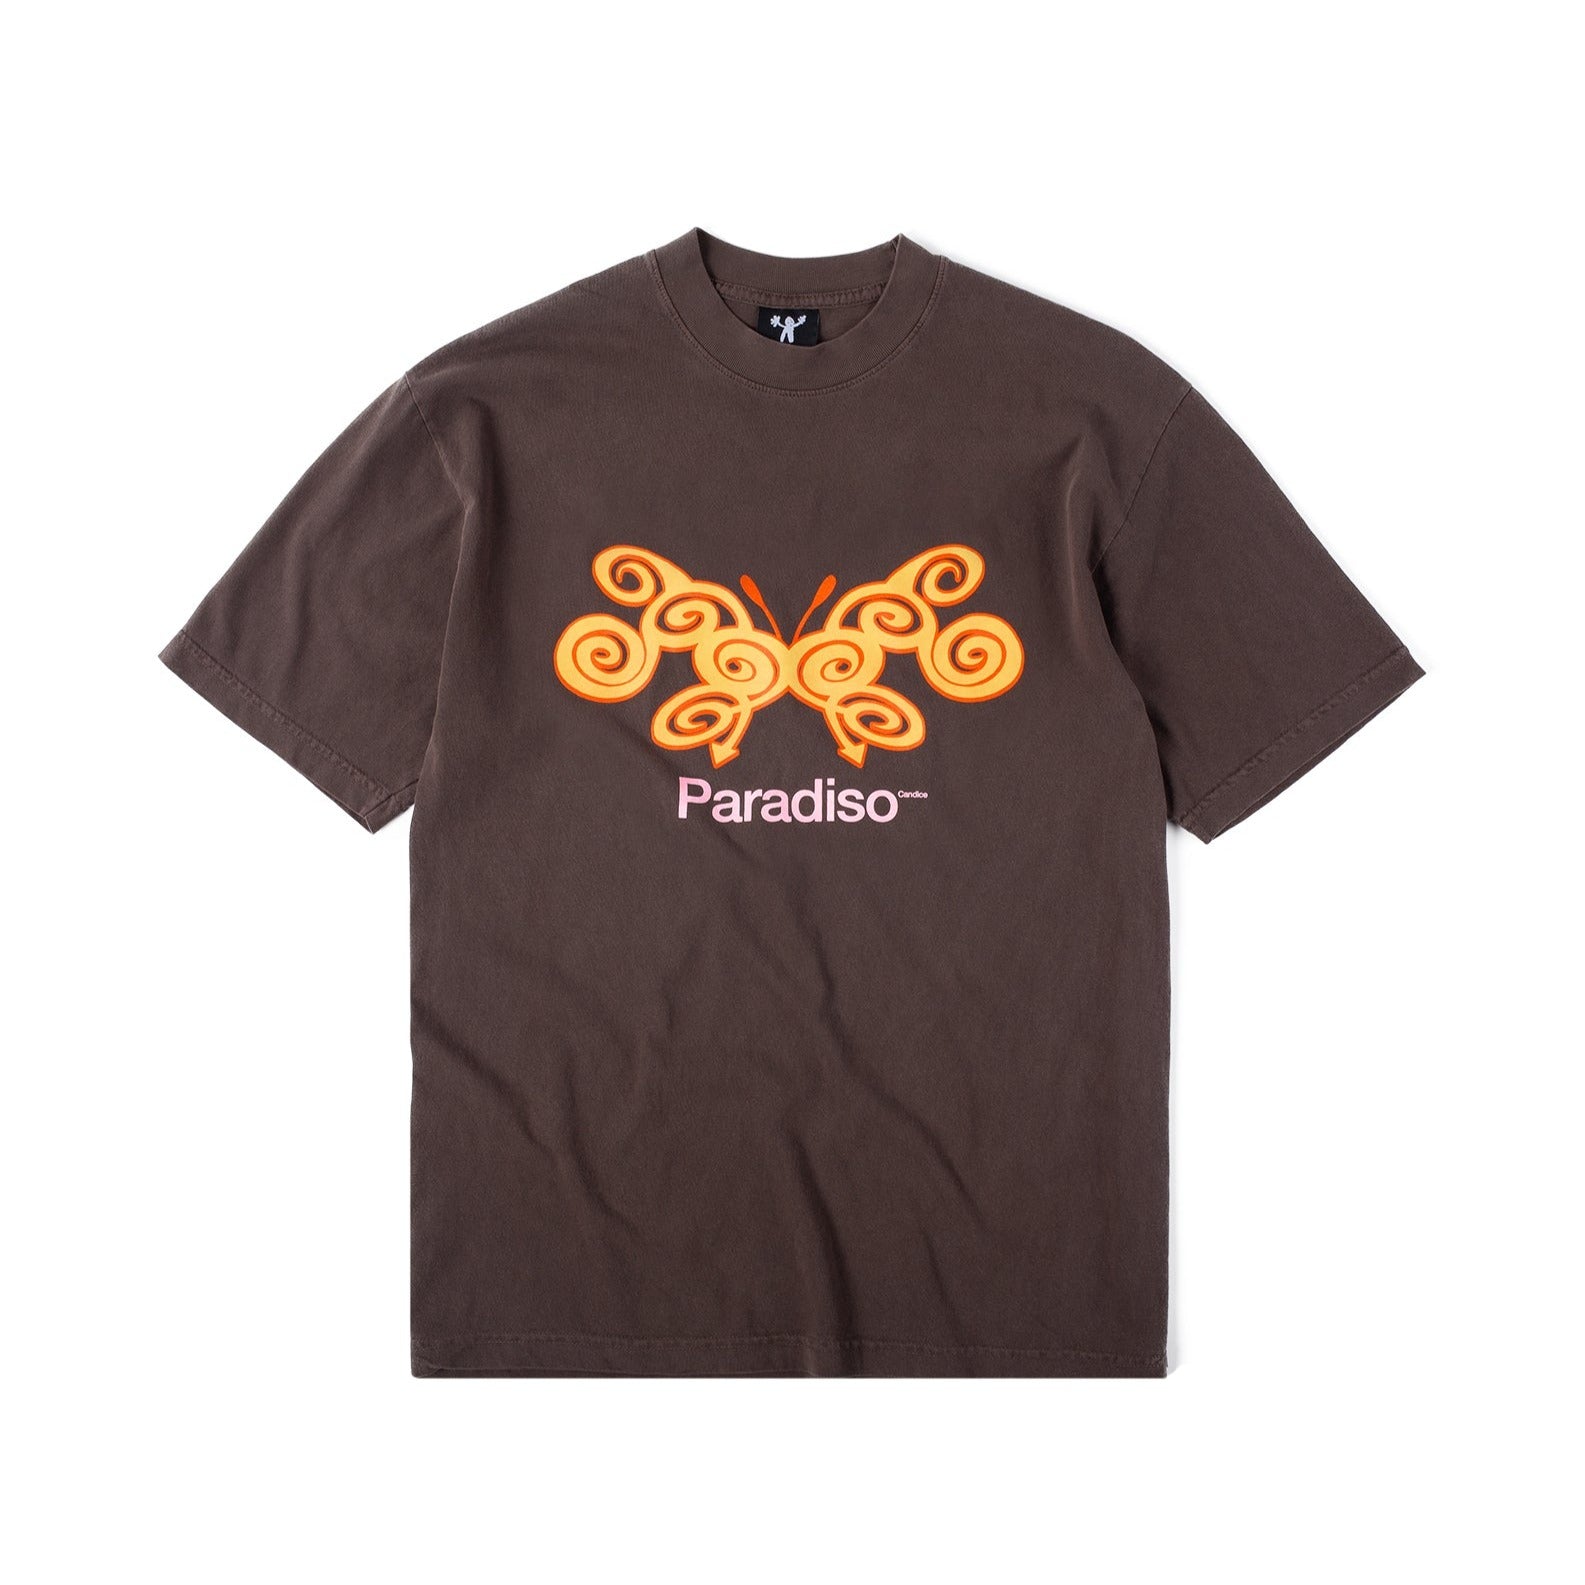 Candice - Candice - Paradiso Tee - Brown